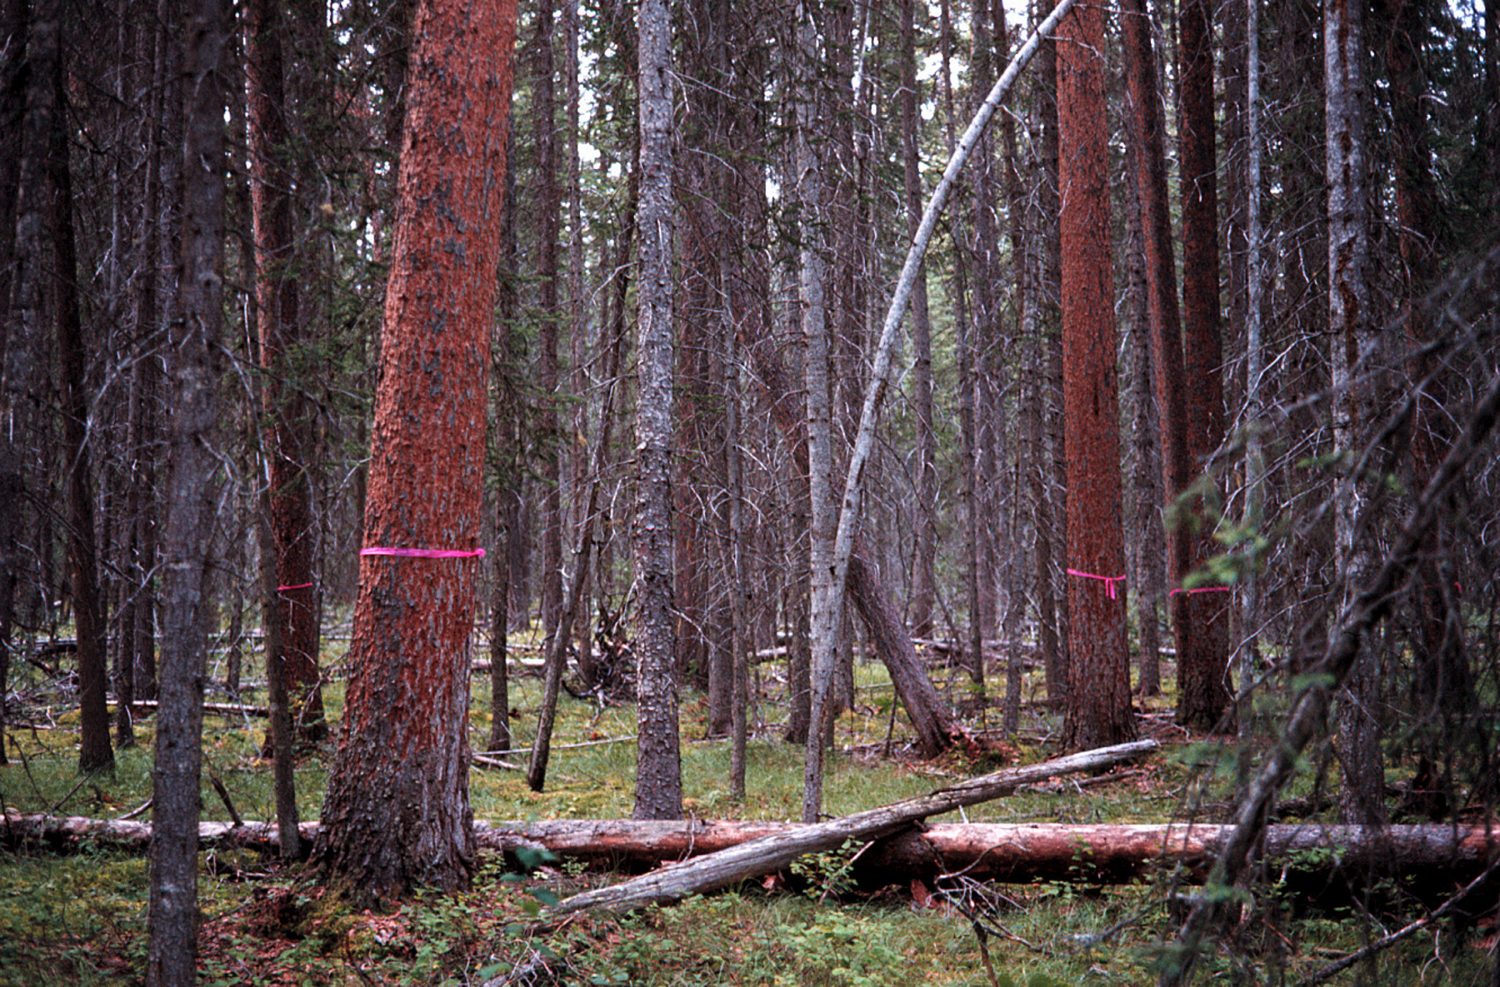 Marked pine trees in a mature forest stand